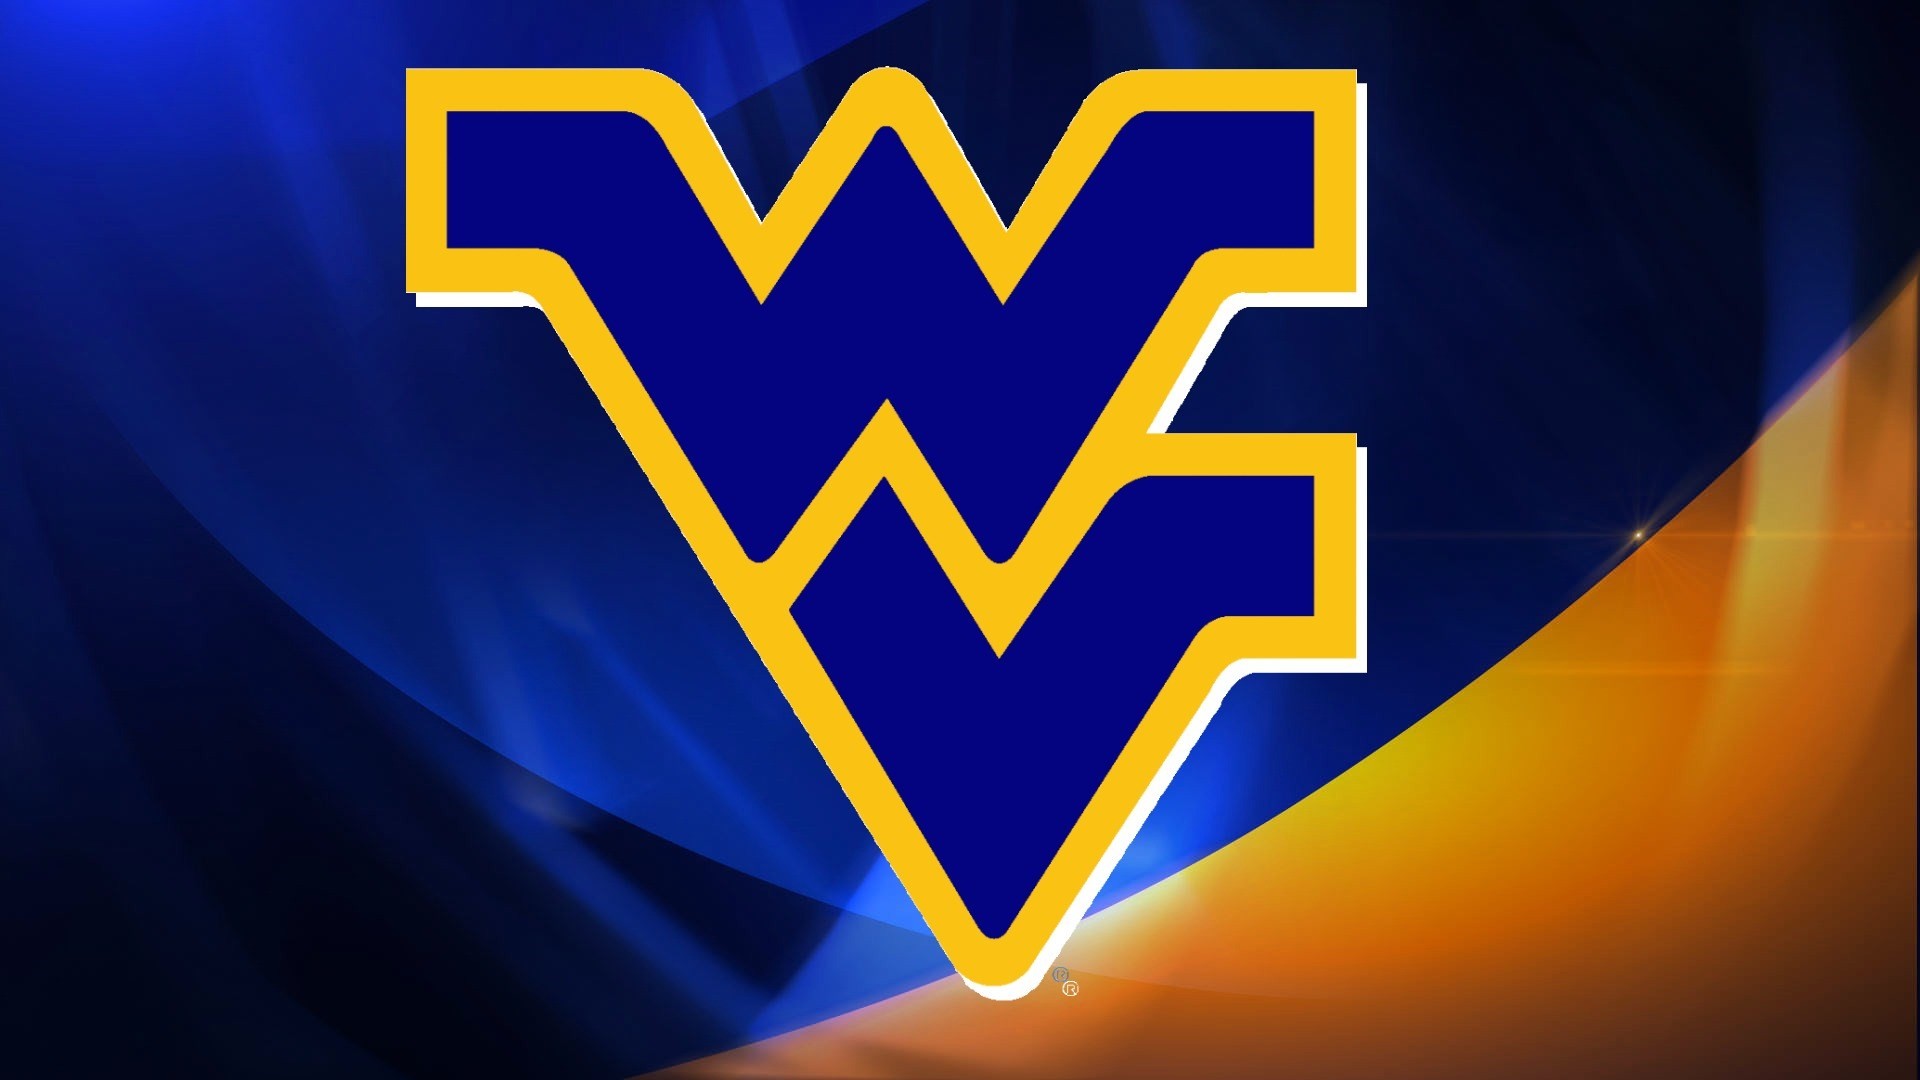 1920x1080 For the 28th time, the West Virginia University men's basketball team has  made it to the NCAA Tournament. On Thursday, March 16, 2017,Mountaineer  fans in ...